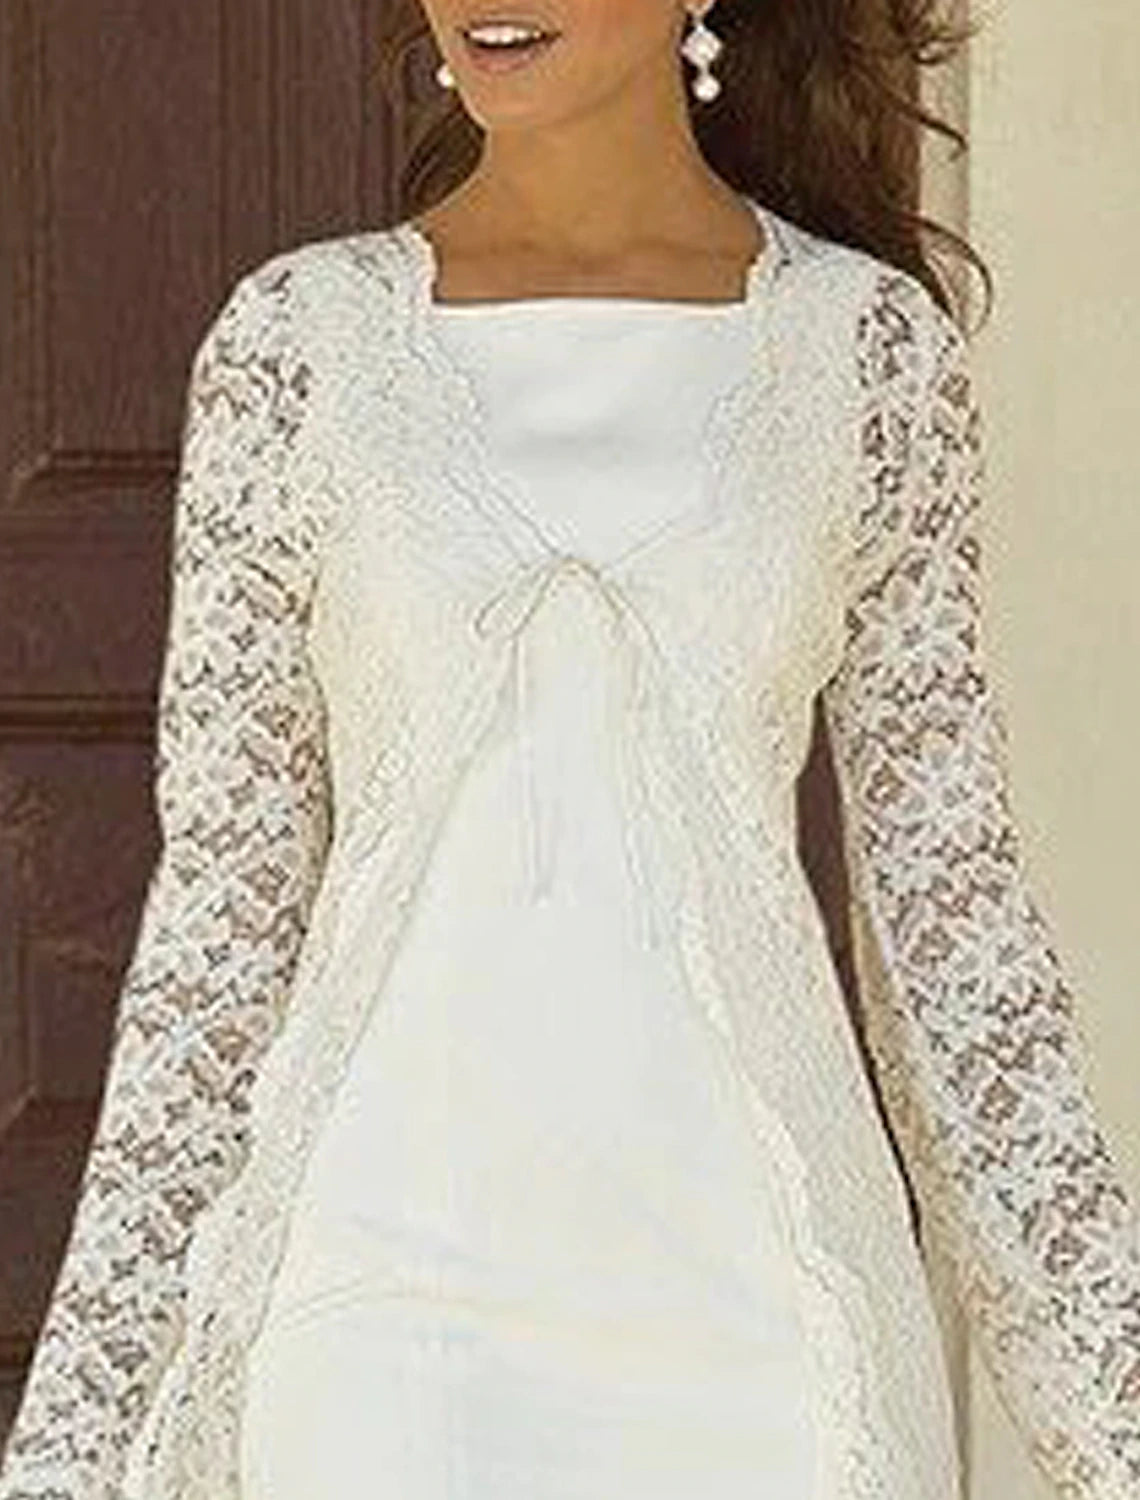 Two Piece Sheath / Column Mother of the Bride Dress Wedding Guest Church Elegant Square Neck Knee Length Chiffon Lace Sleeveless Jacket Dresses with Solid Color